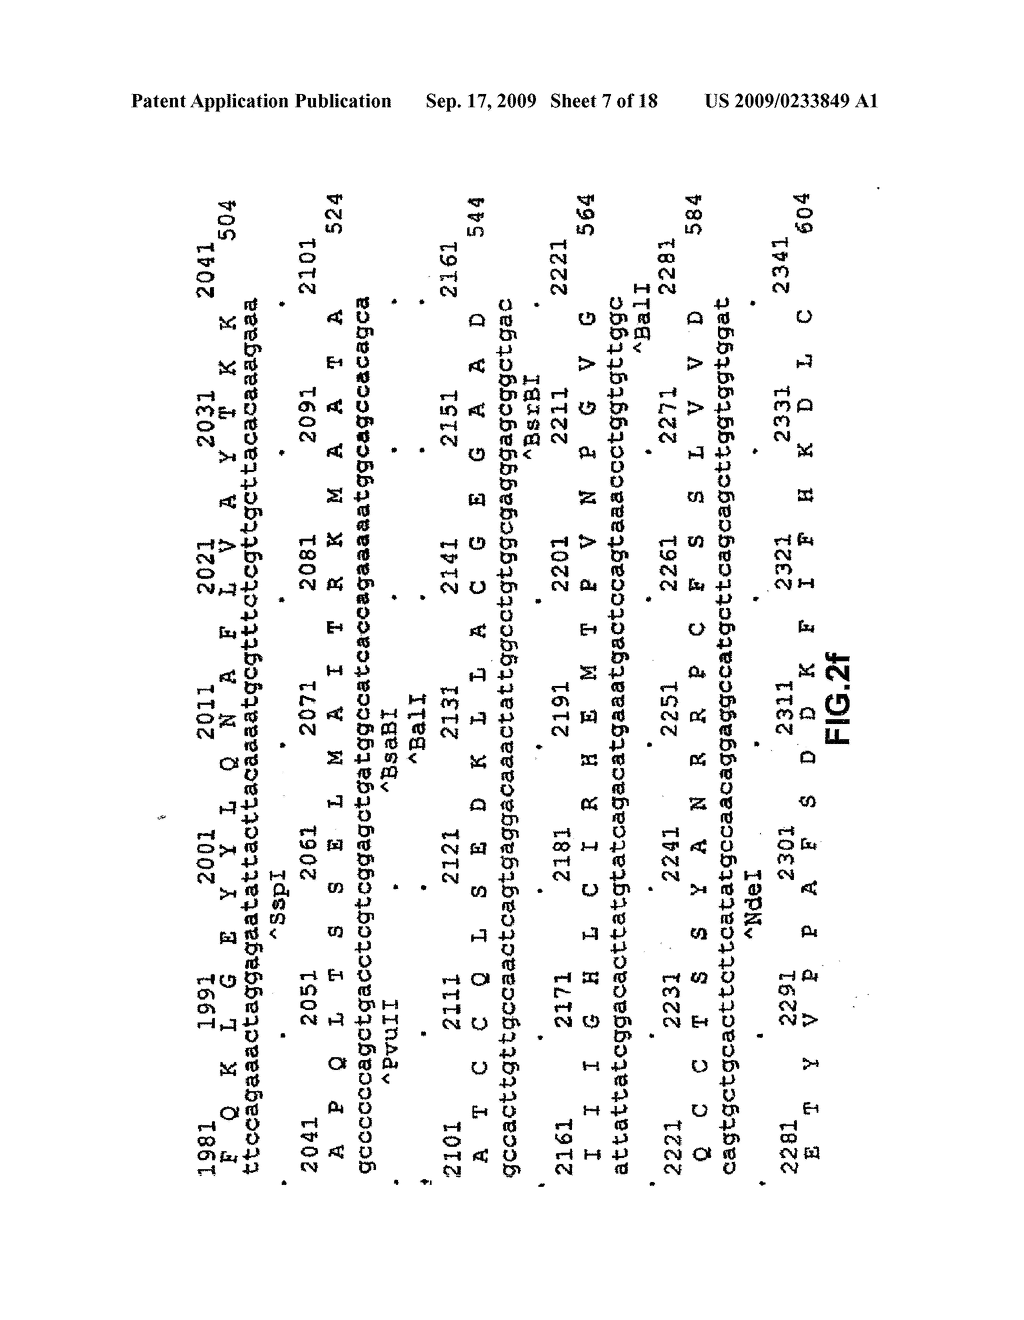 Recombinant Alpha-Fetoprotein, Method and Means for Preparation Thereof, Compositions on the Base Thereof and Use Thereof - diagram, schematic, and image 08